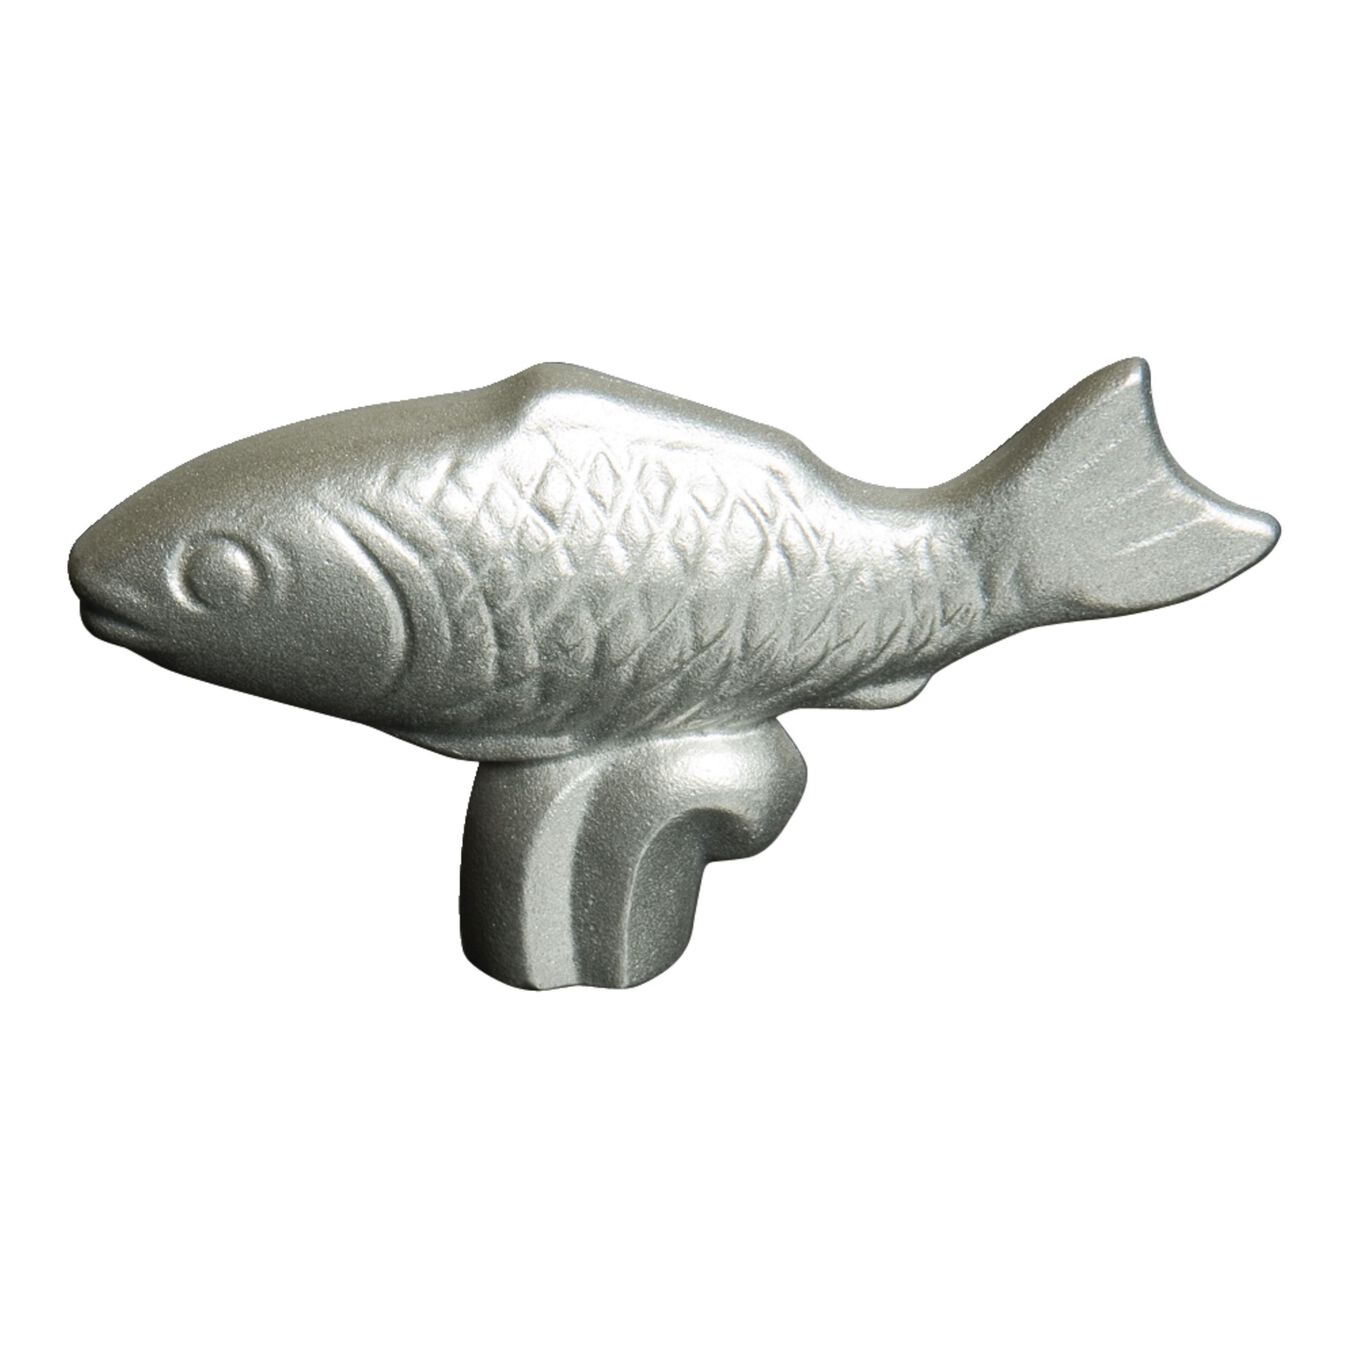 stainless steel fish Knob,,large 1